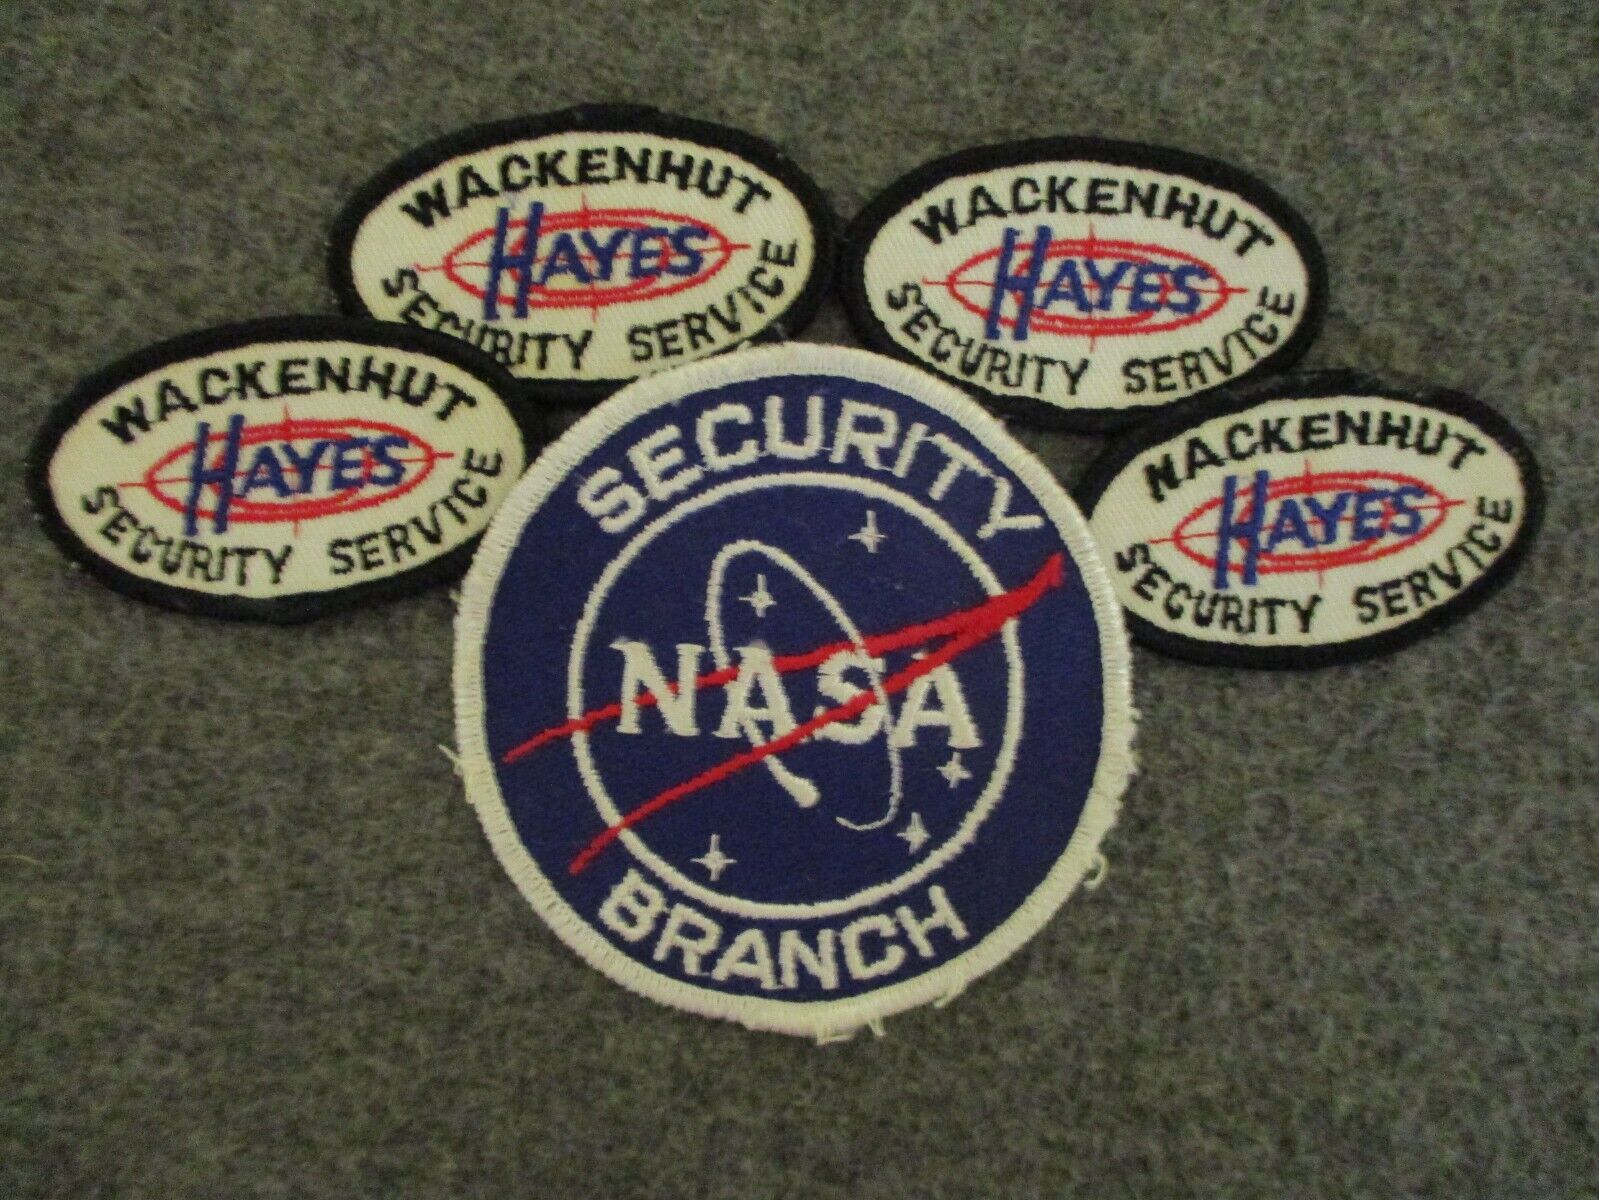 1965 NASA SECURITY BRANCH VECTOR MEATBALL + 4 HAYES AEROSPACE SECURITY PATCHES